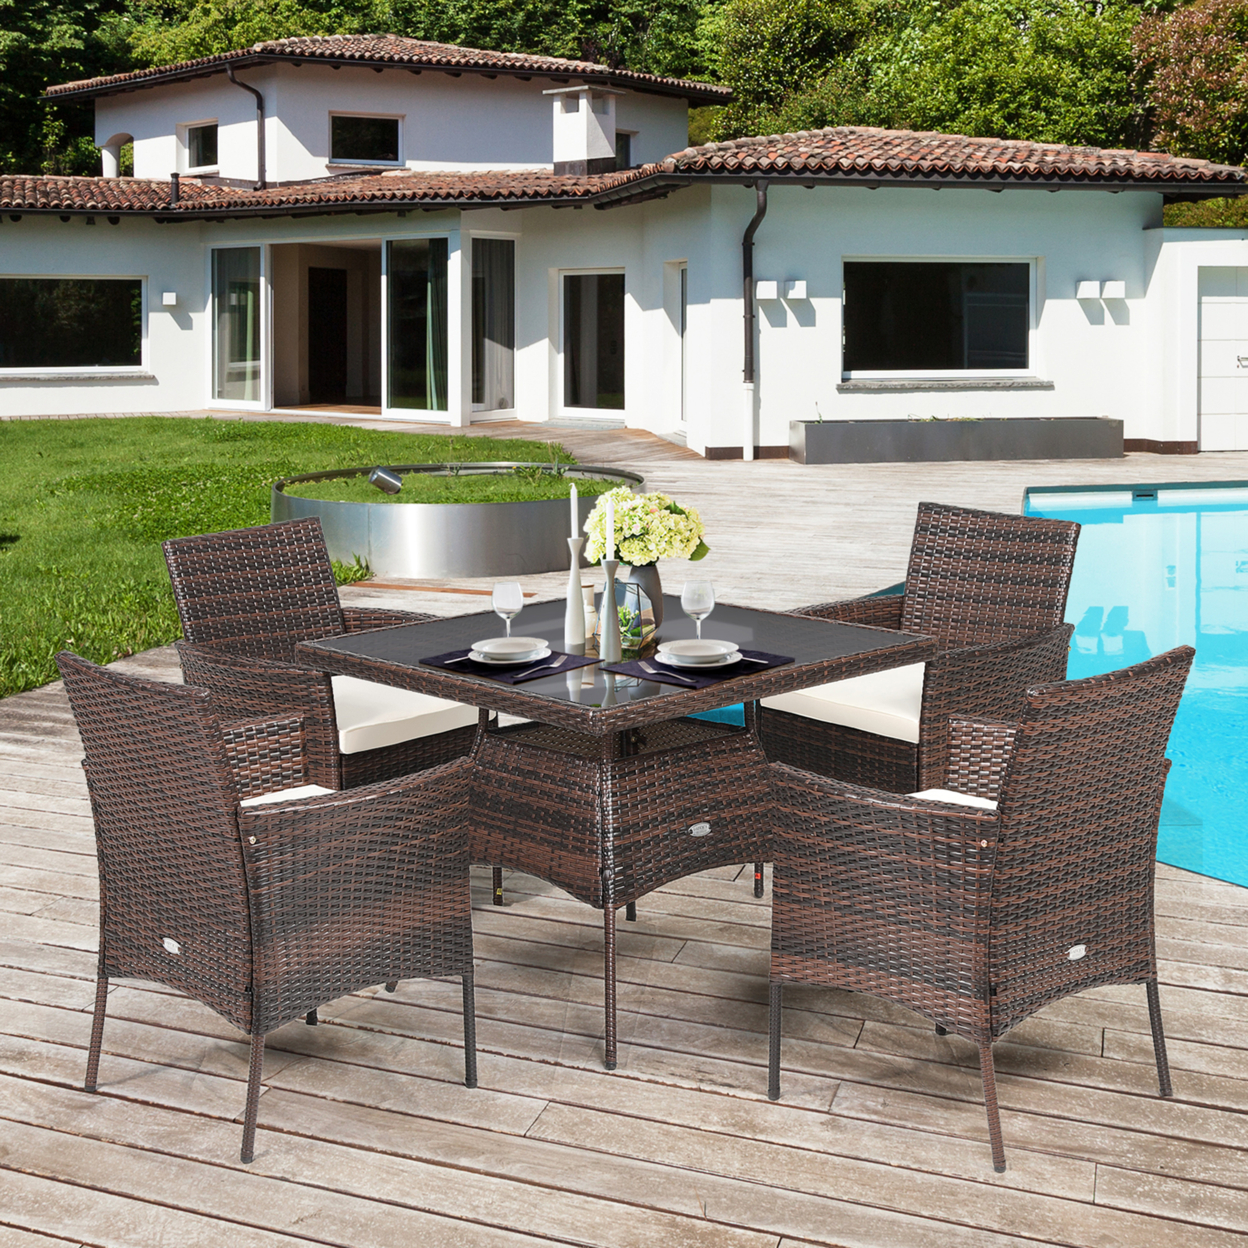 5PCS Rattan Patio Dining Table Set Outdoor Furniture Set W/ 4 Seat Cushions